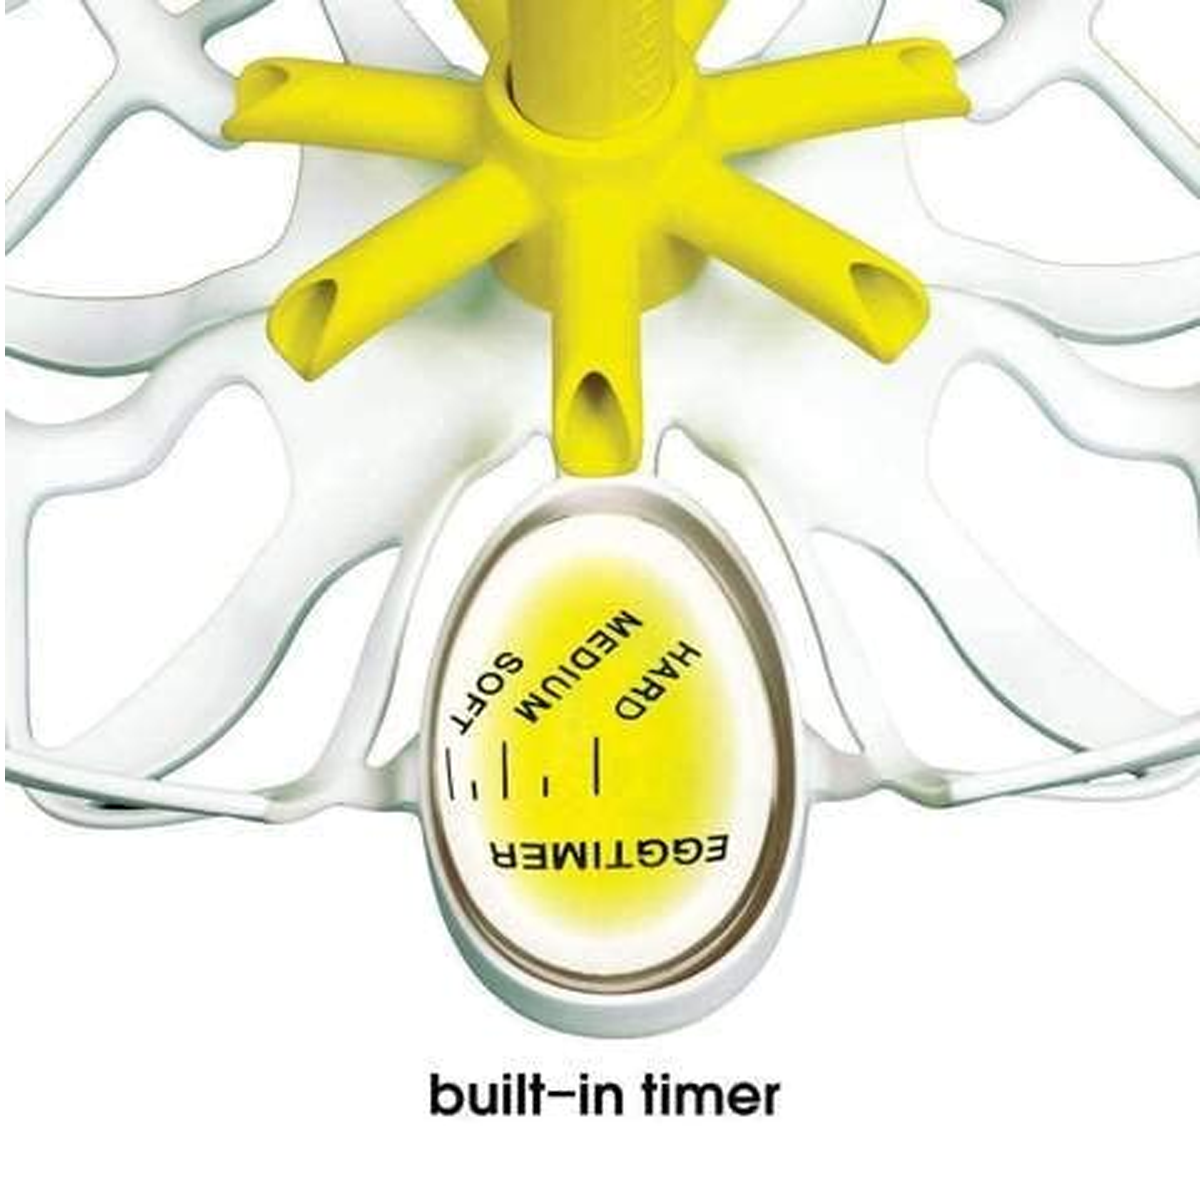 Home Brite Perfect Egg Boiler Holds 5 At a Time